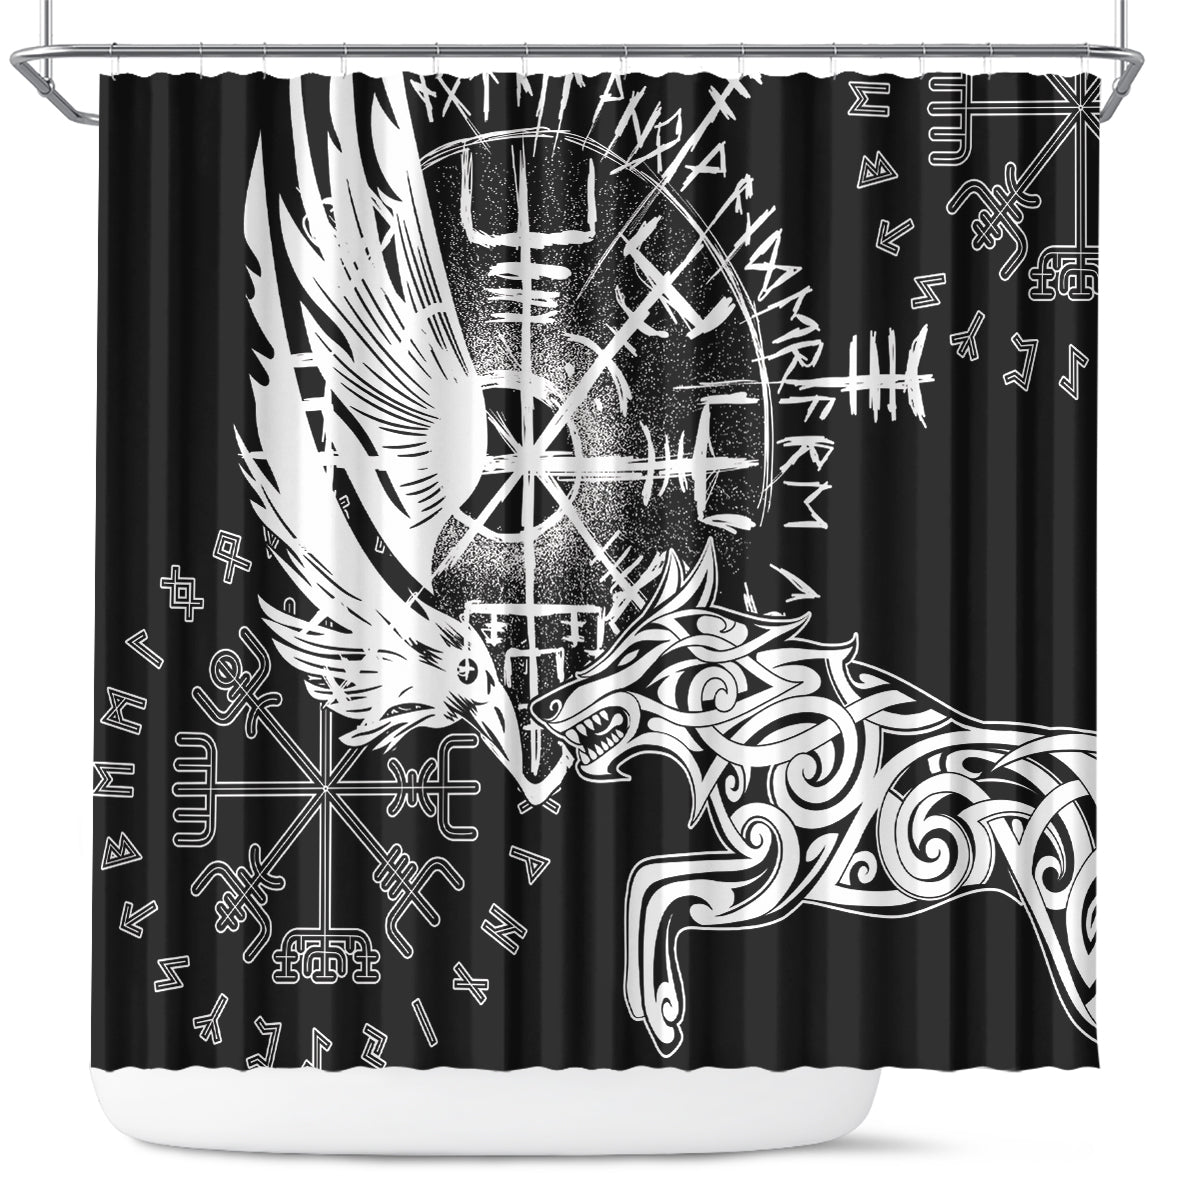 Vikings Raven and Wolf Shower Curtain with Aegishjalmur Unique